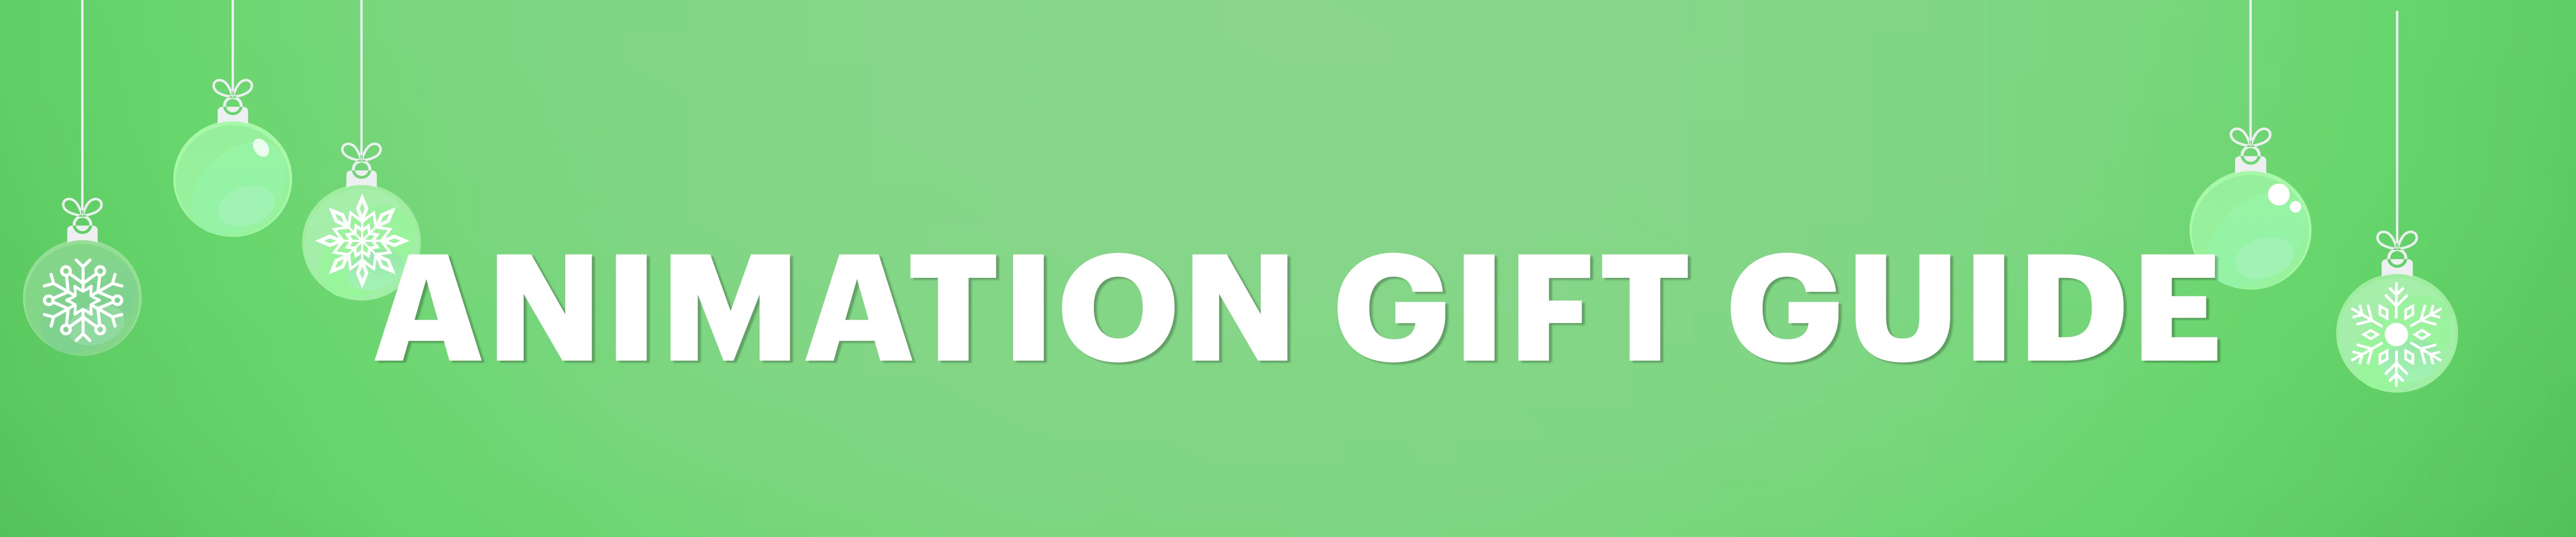 Animation Gift Guide banner